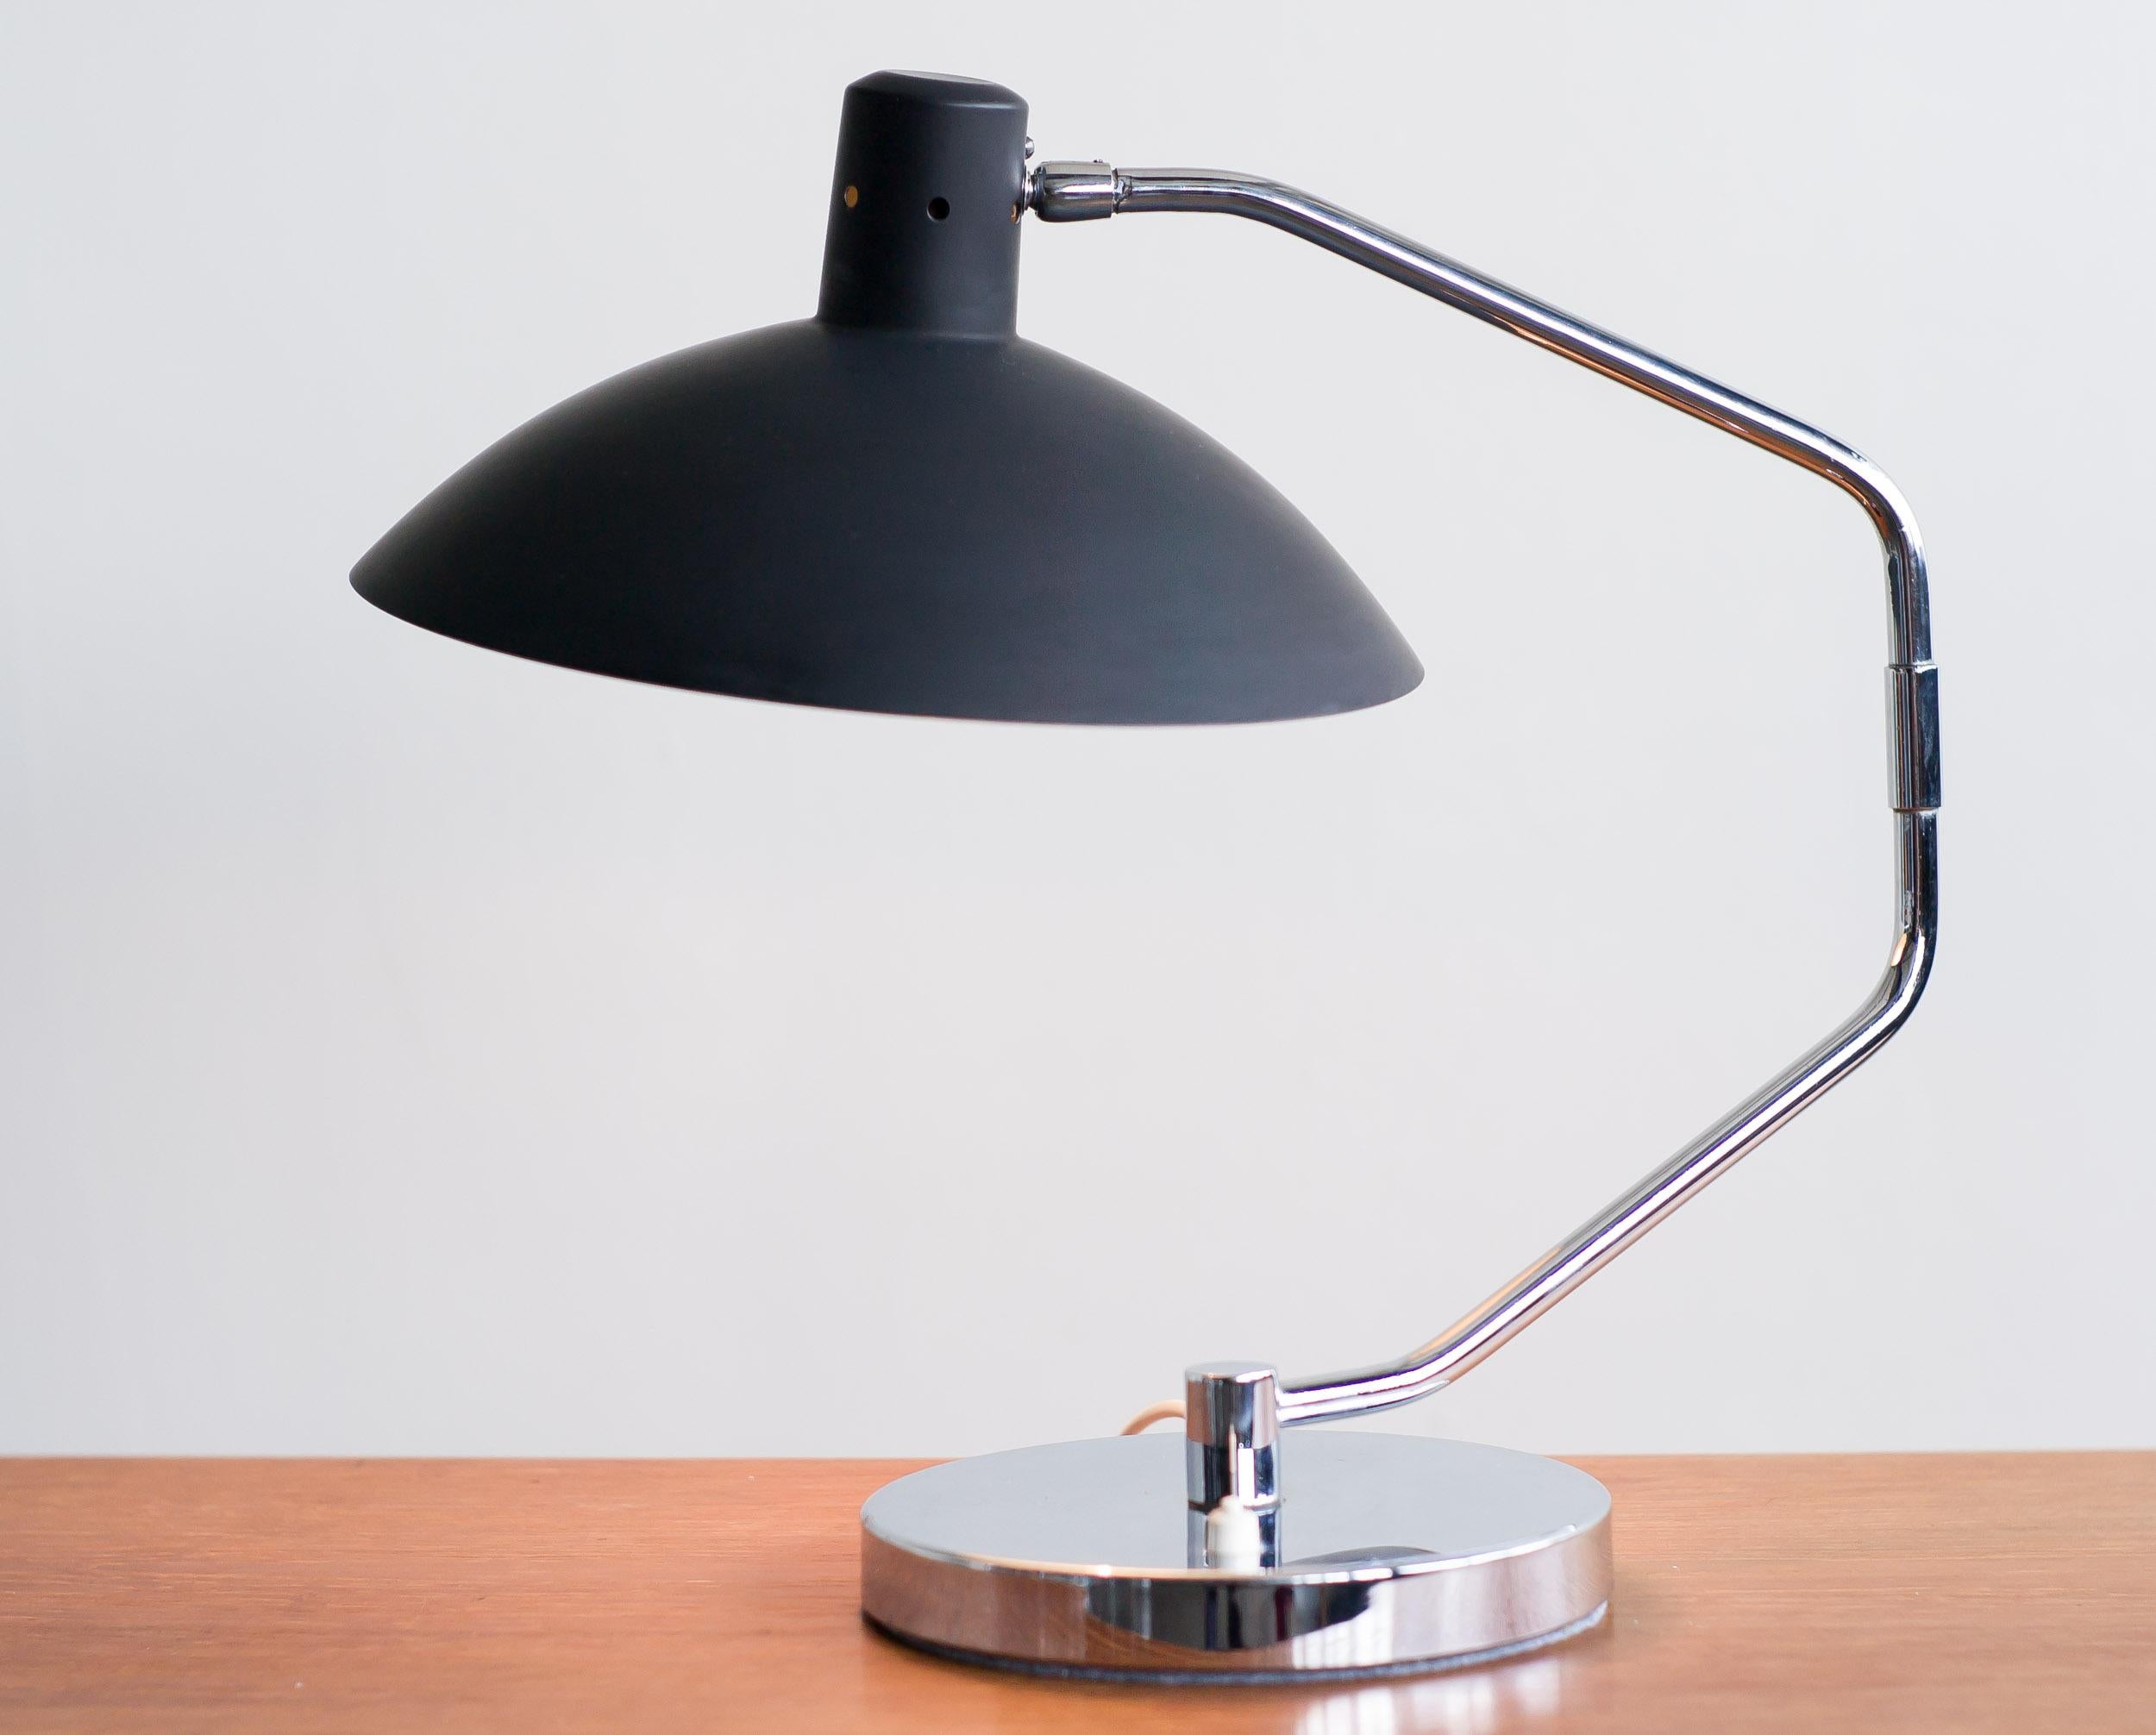 Iconic swing arm desk lamp model no. 8, designed by Clay Michie in 1958 and manufactured by Knoll International.
Nice vintage condition. The original black lacquer changed to a slightly dull charcoal color from age. 
The chrome base has a slight